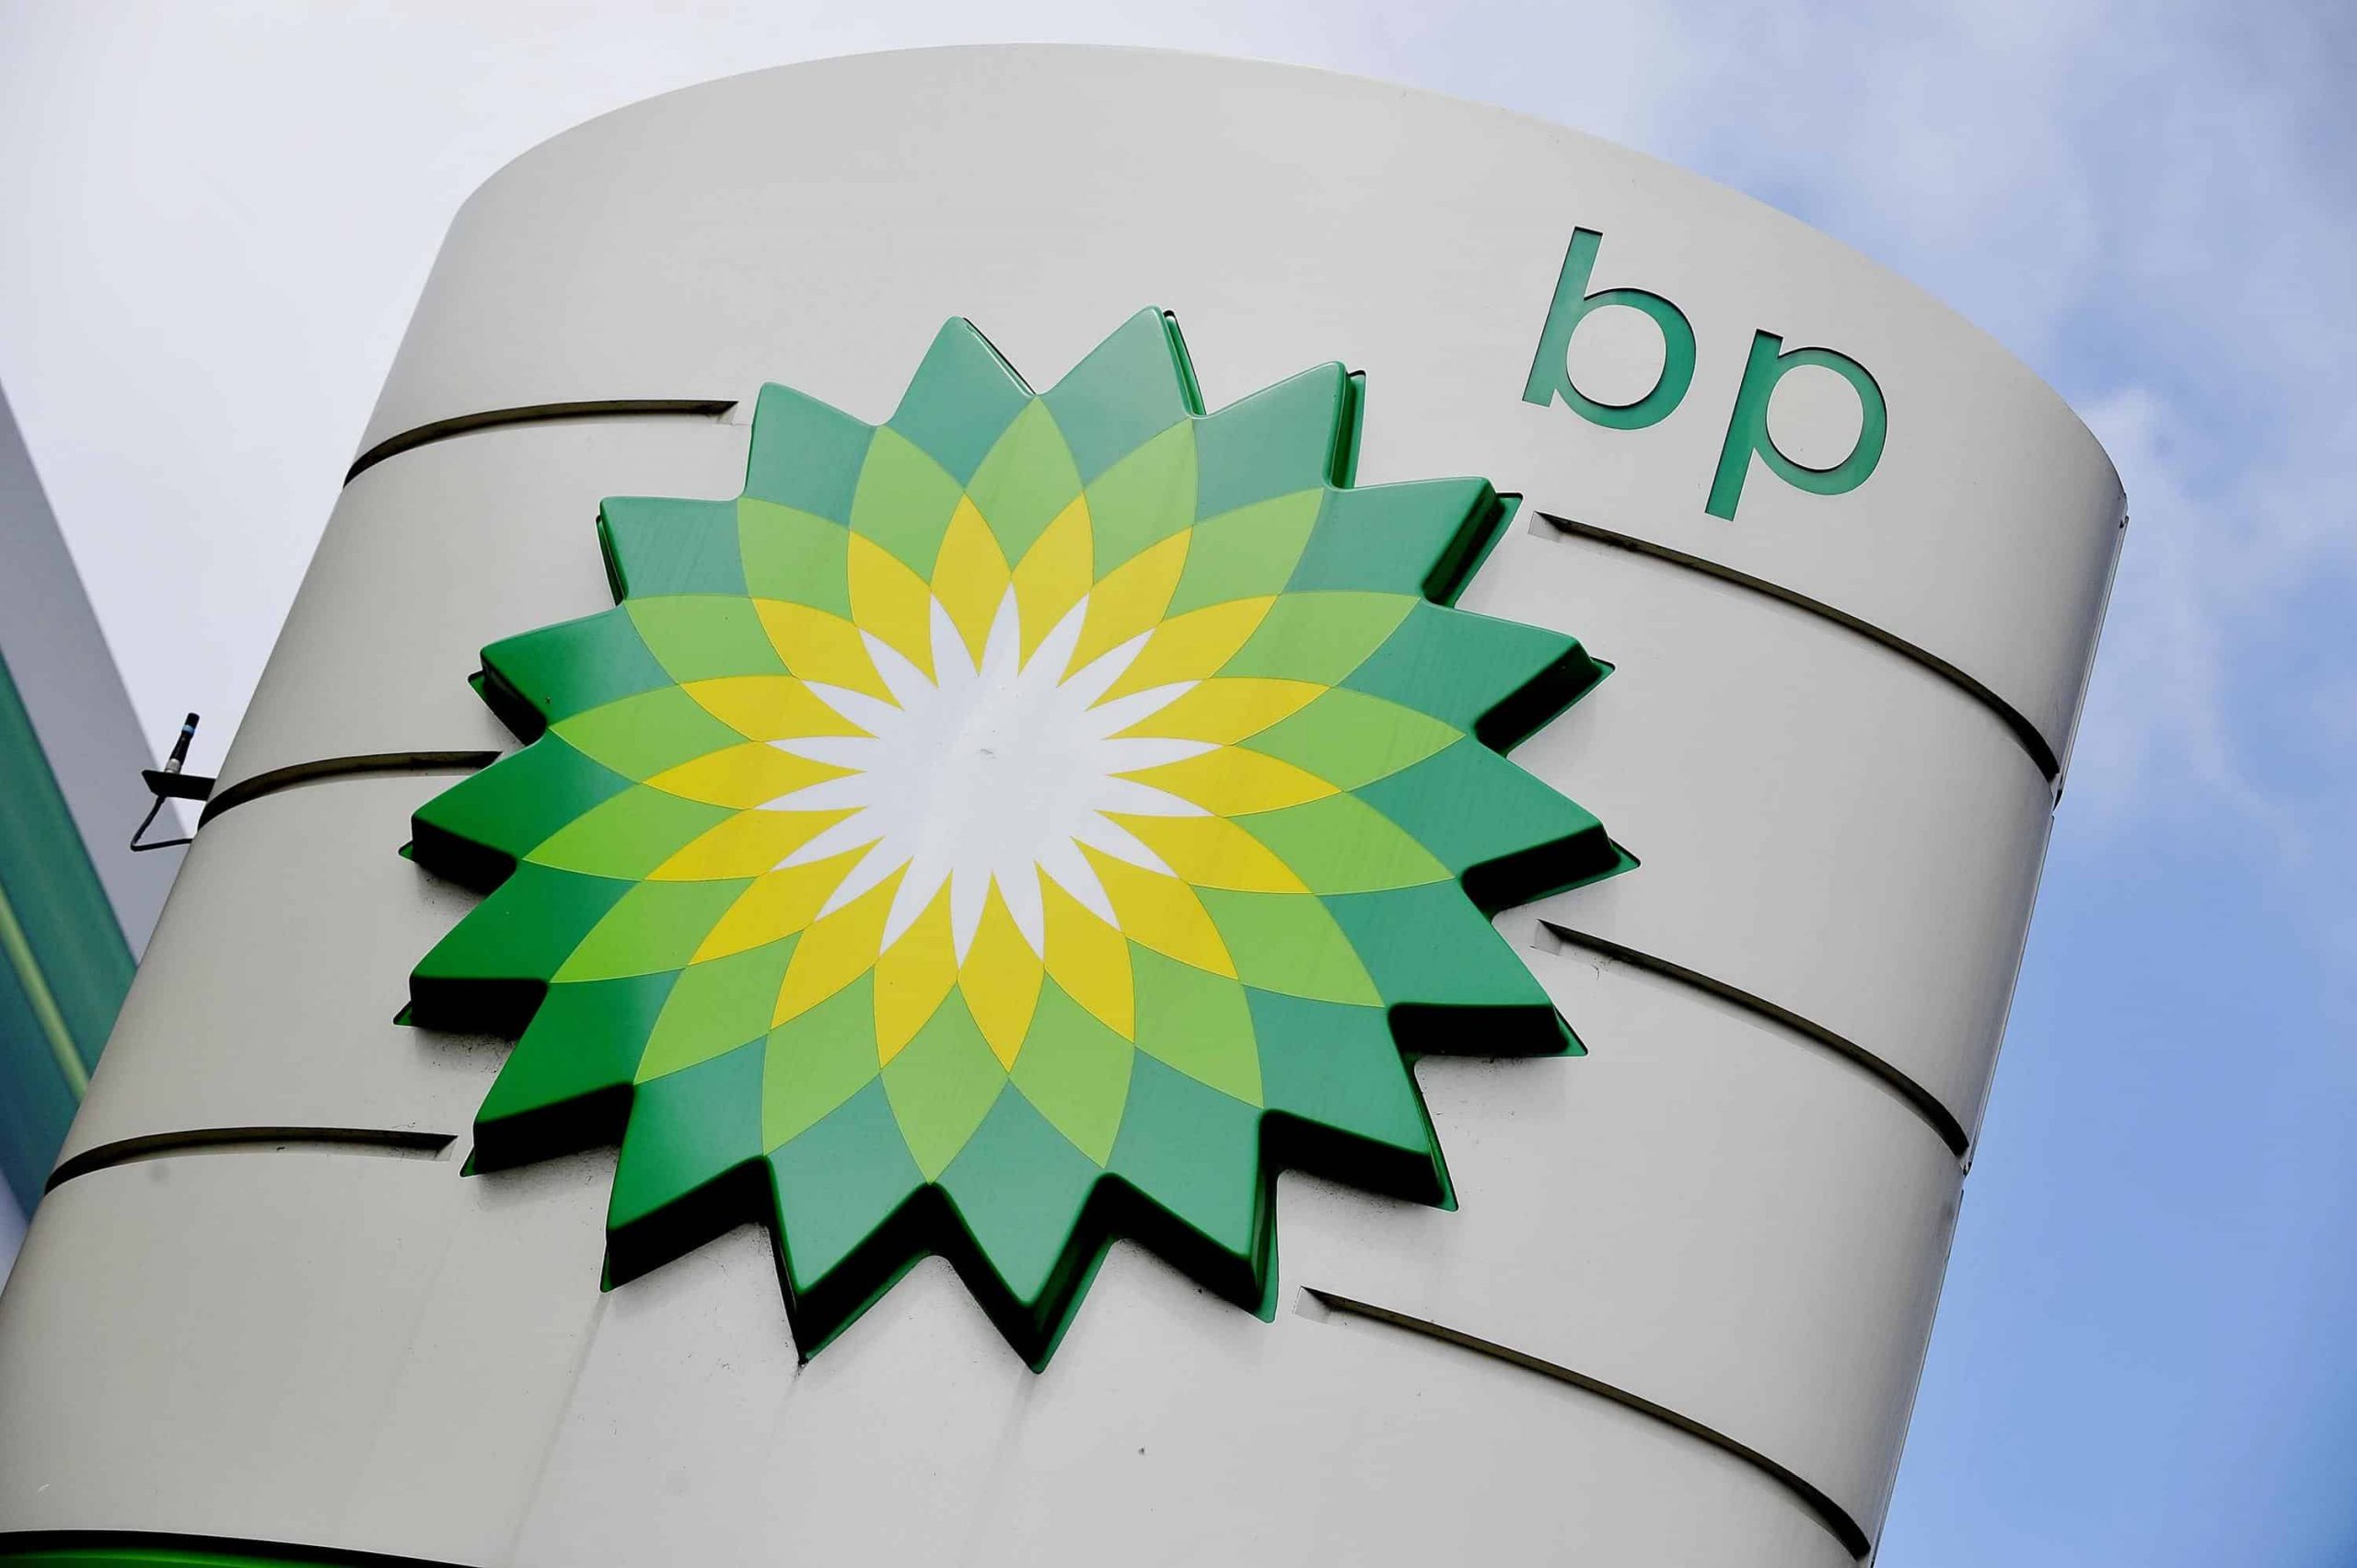 Climate change – ‘Looking for somebody to blame is not really the right way of thinking about this’ BP chief economist